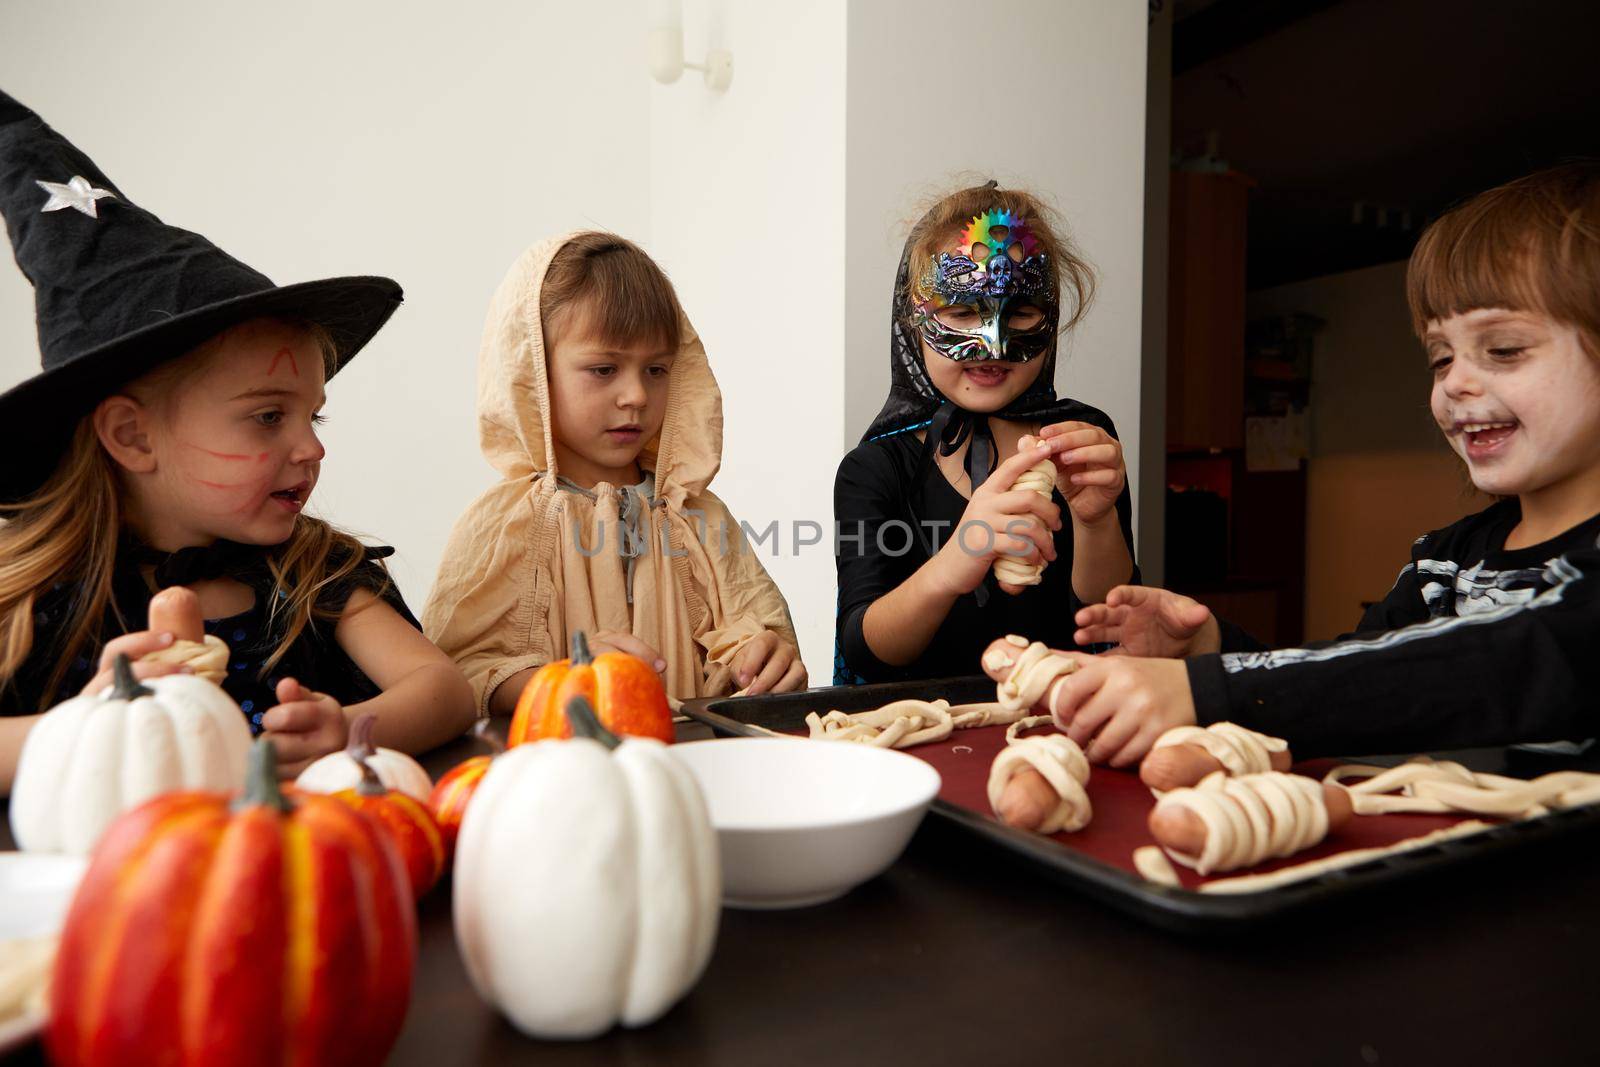 Children in Halloween costumes cooking together at table by Demkat